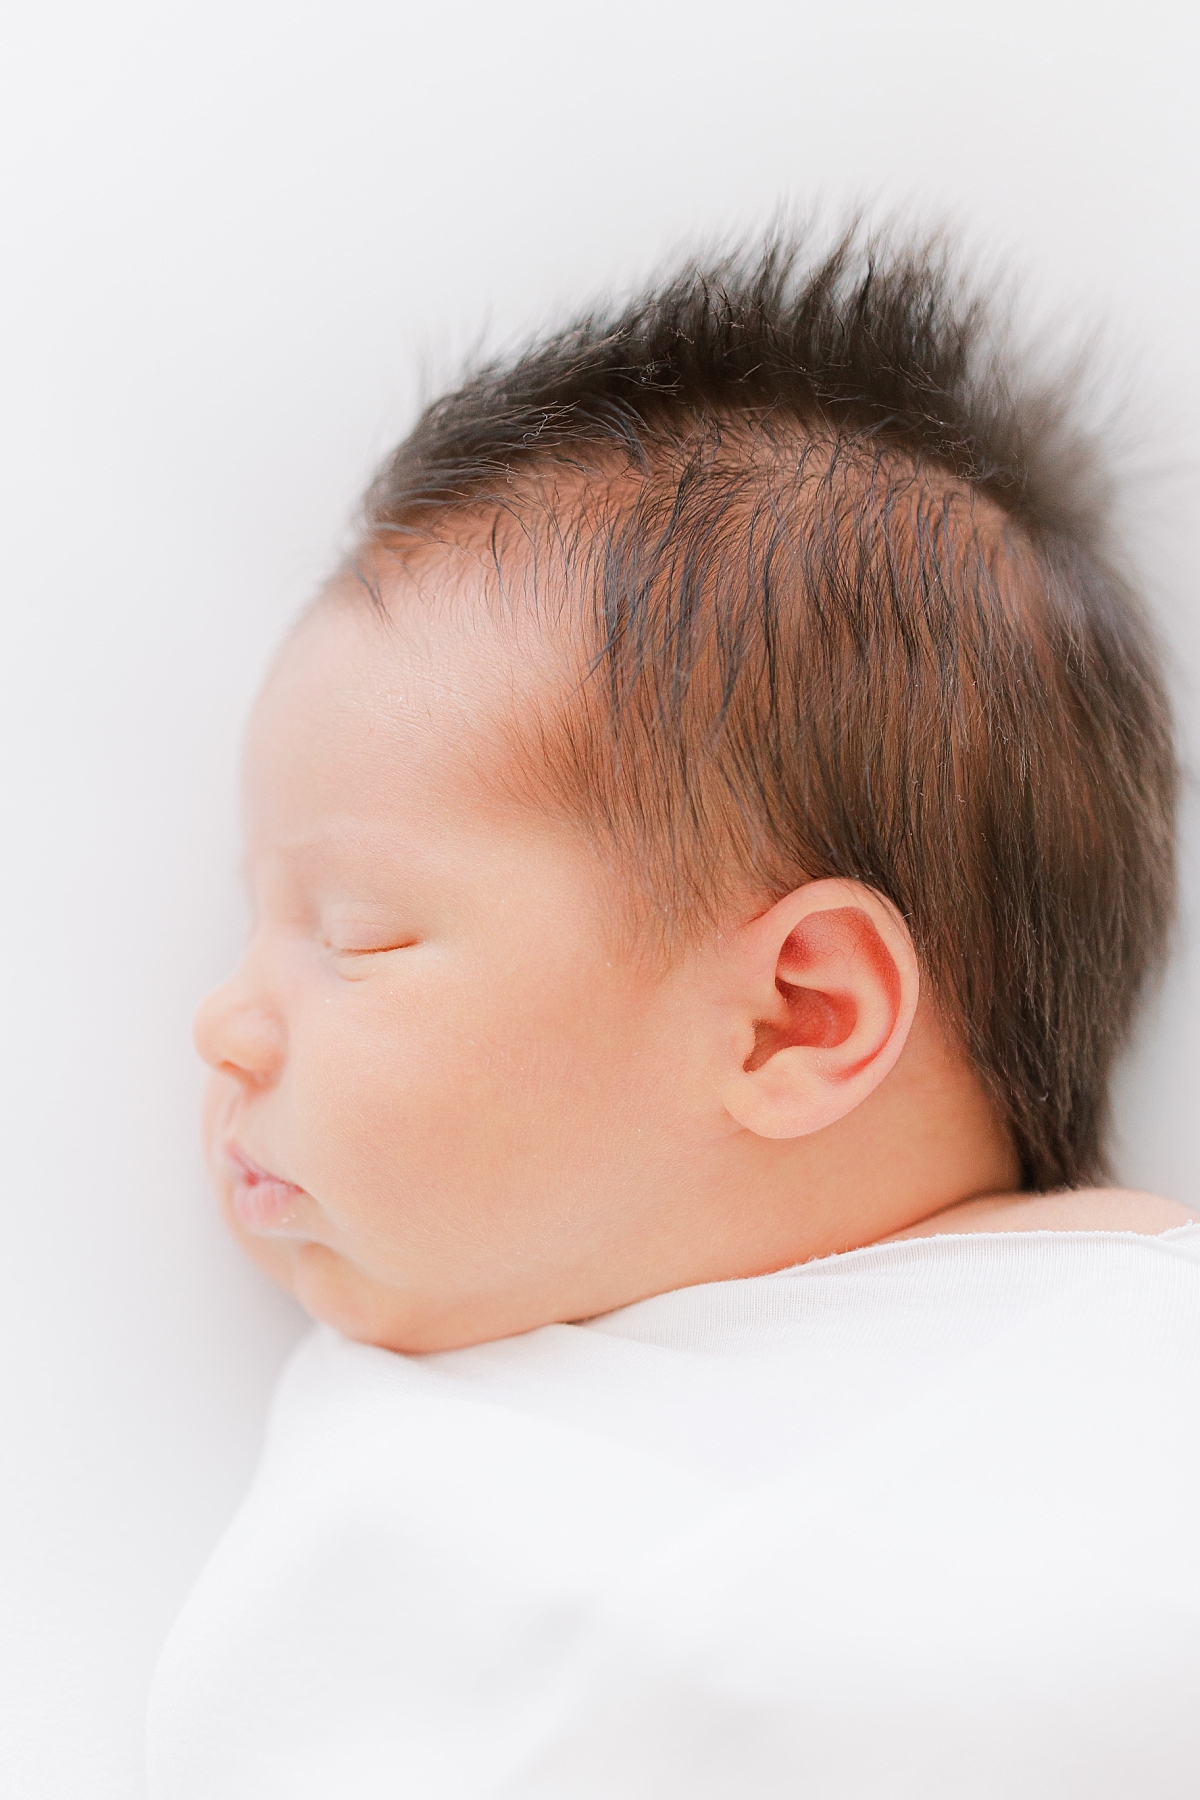 newborn photography near you of baby with lots of fuzzy hair